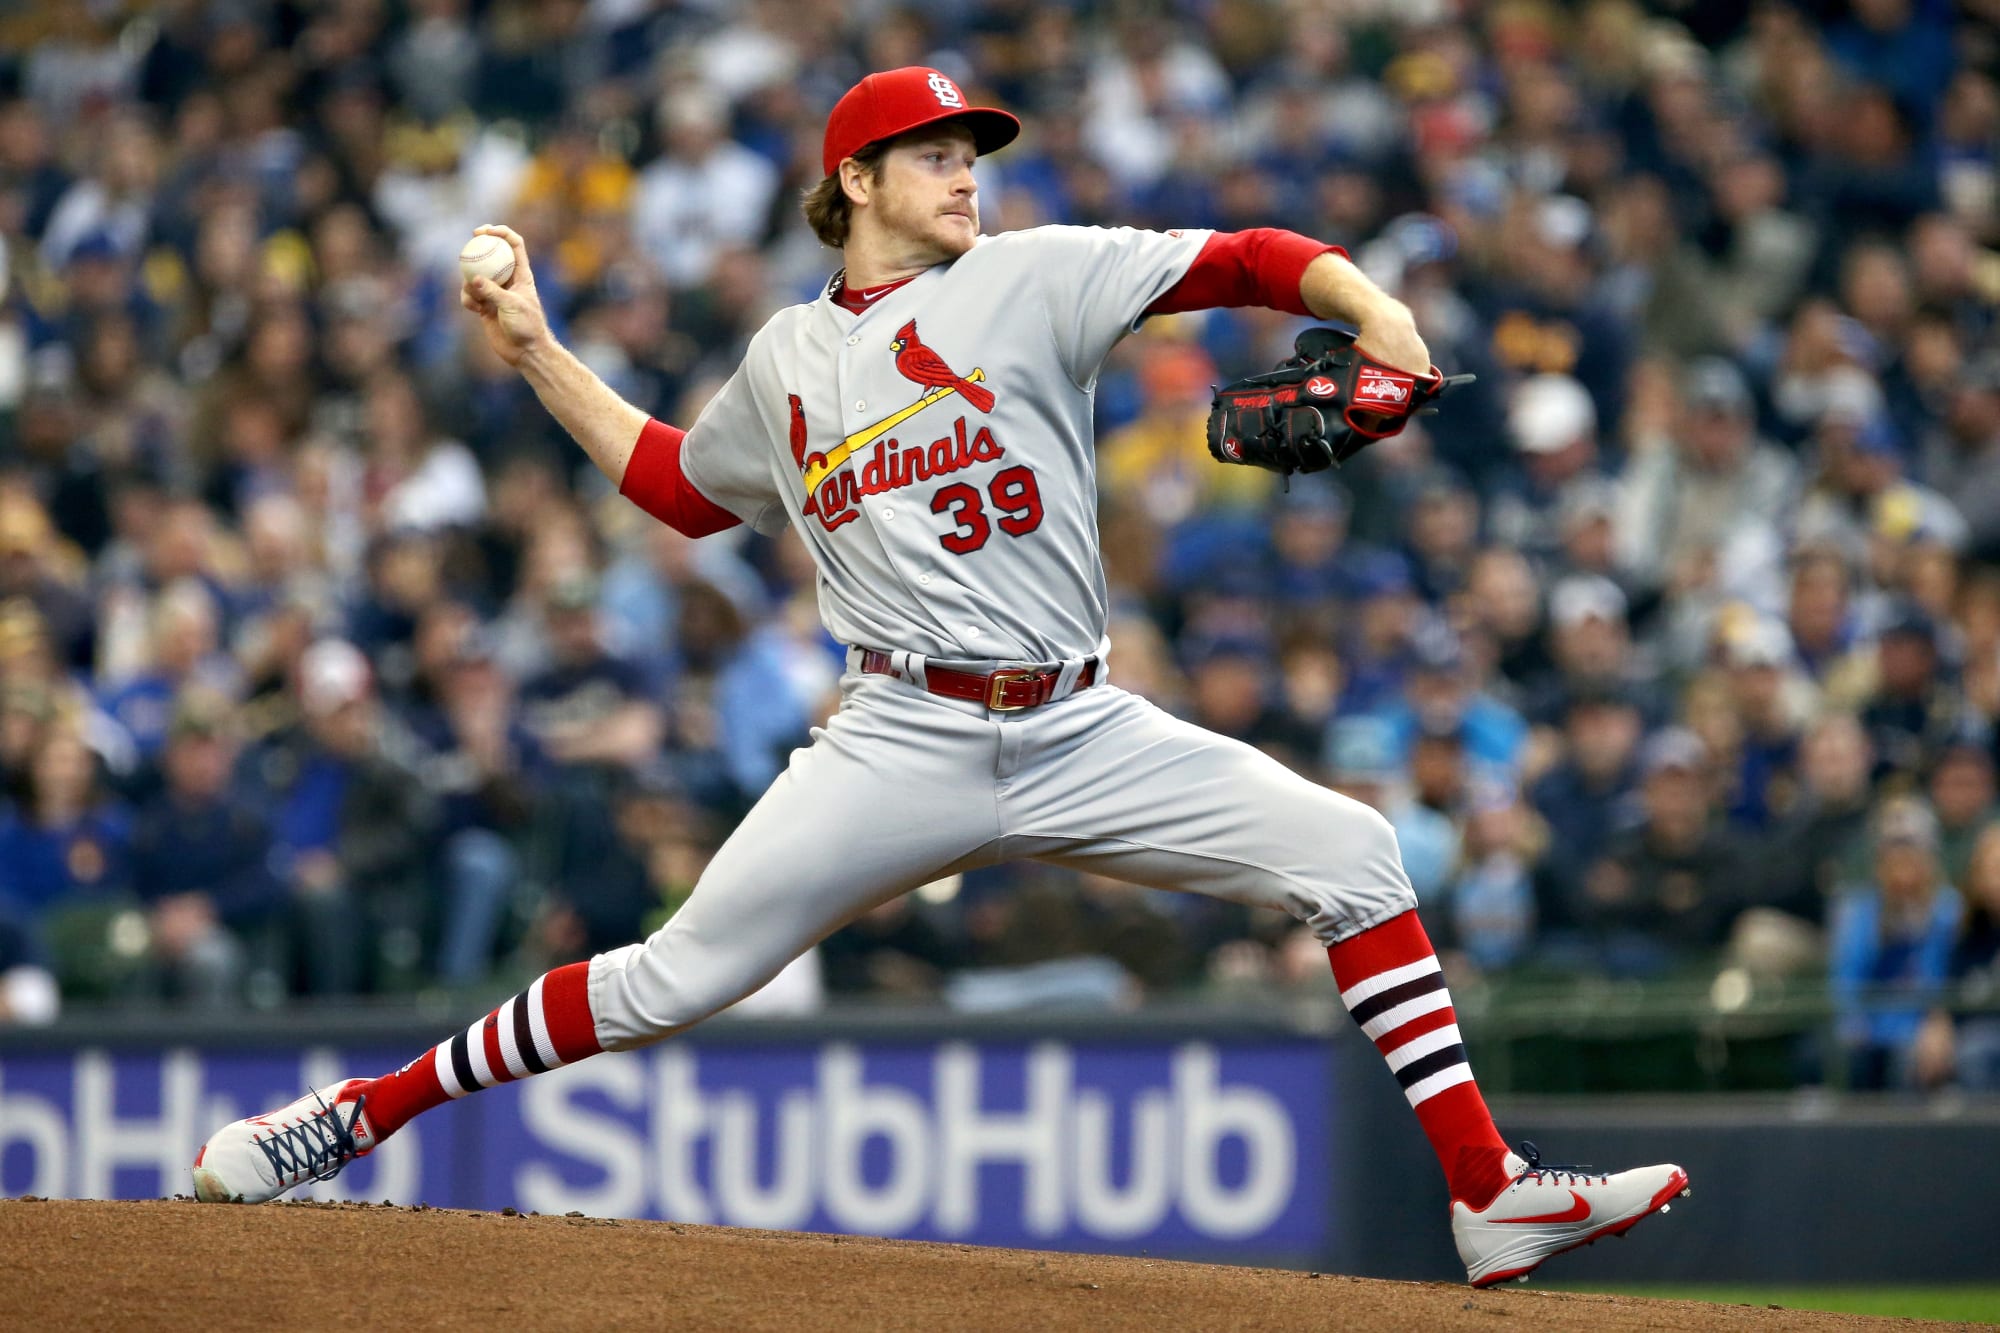 St. Louis Cardinals: Cardinals take game one against the Brewers